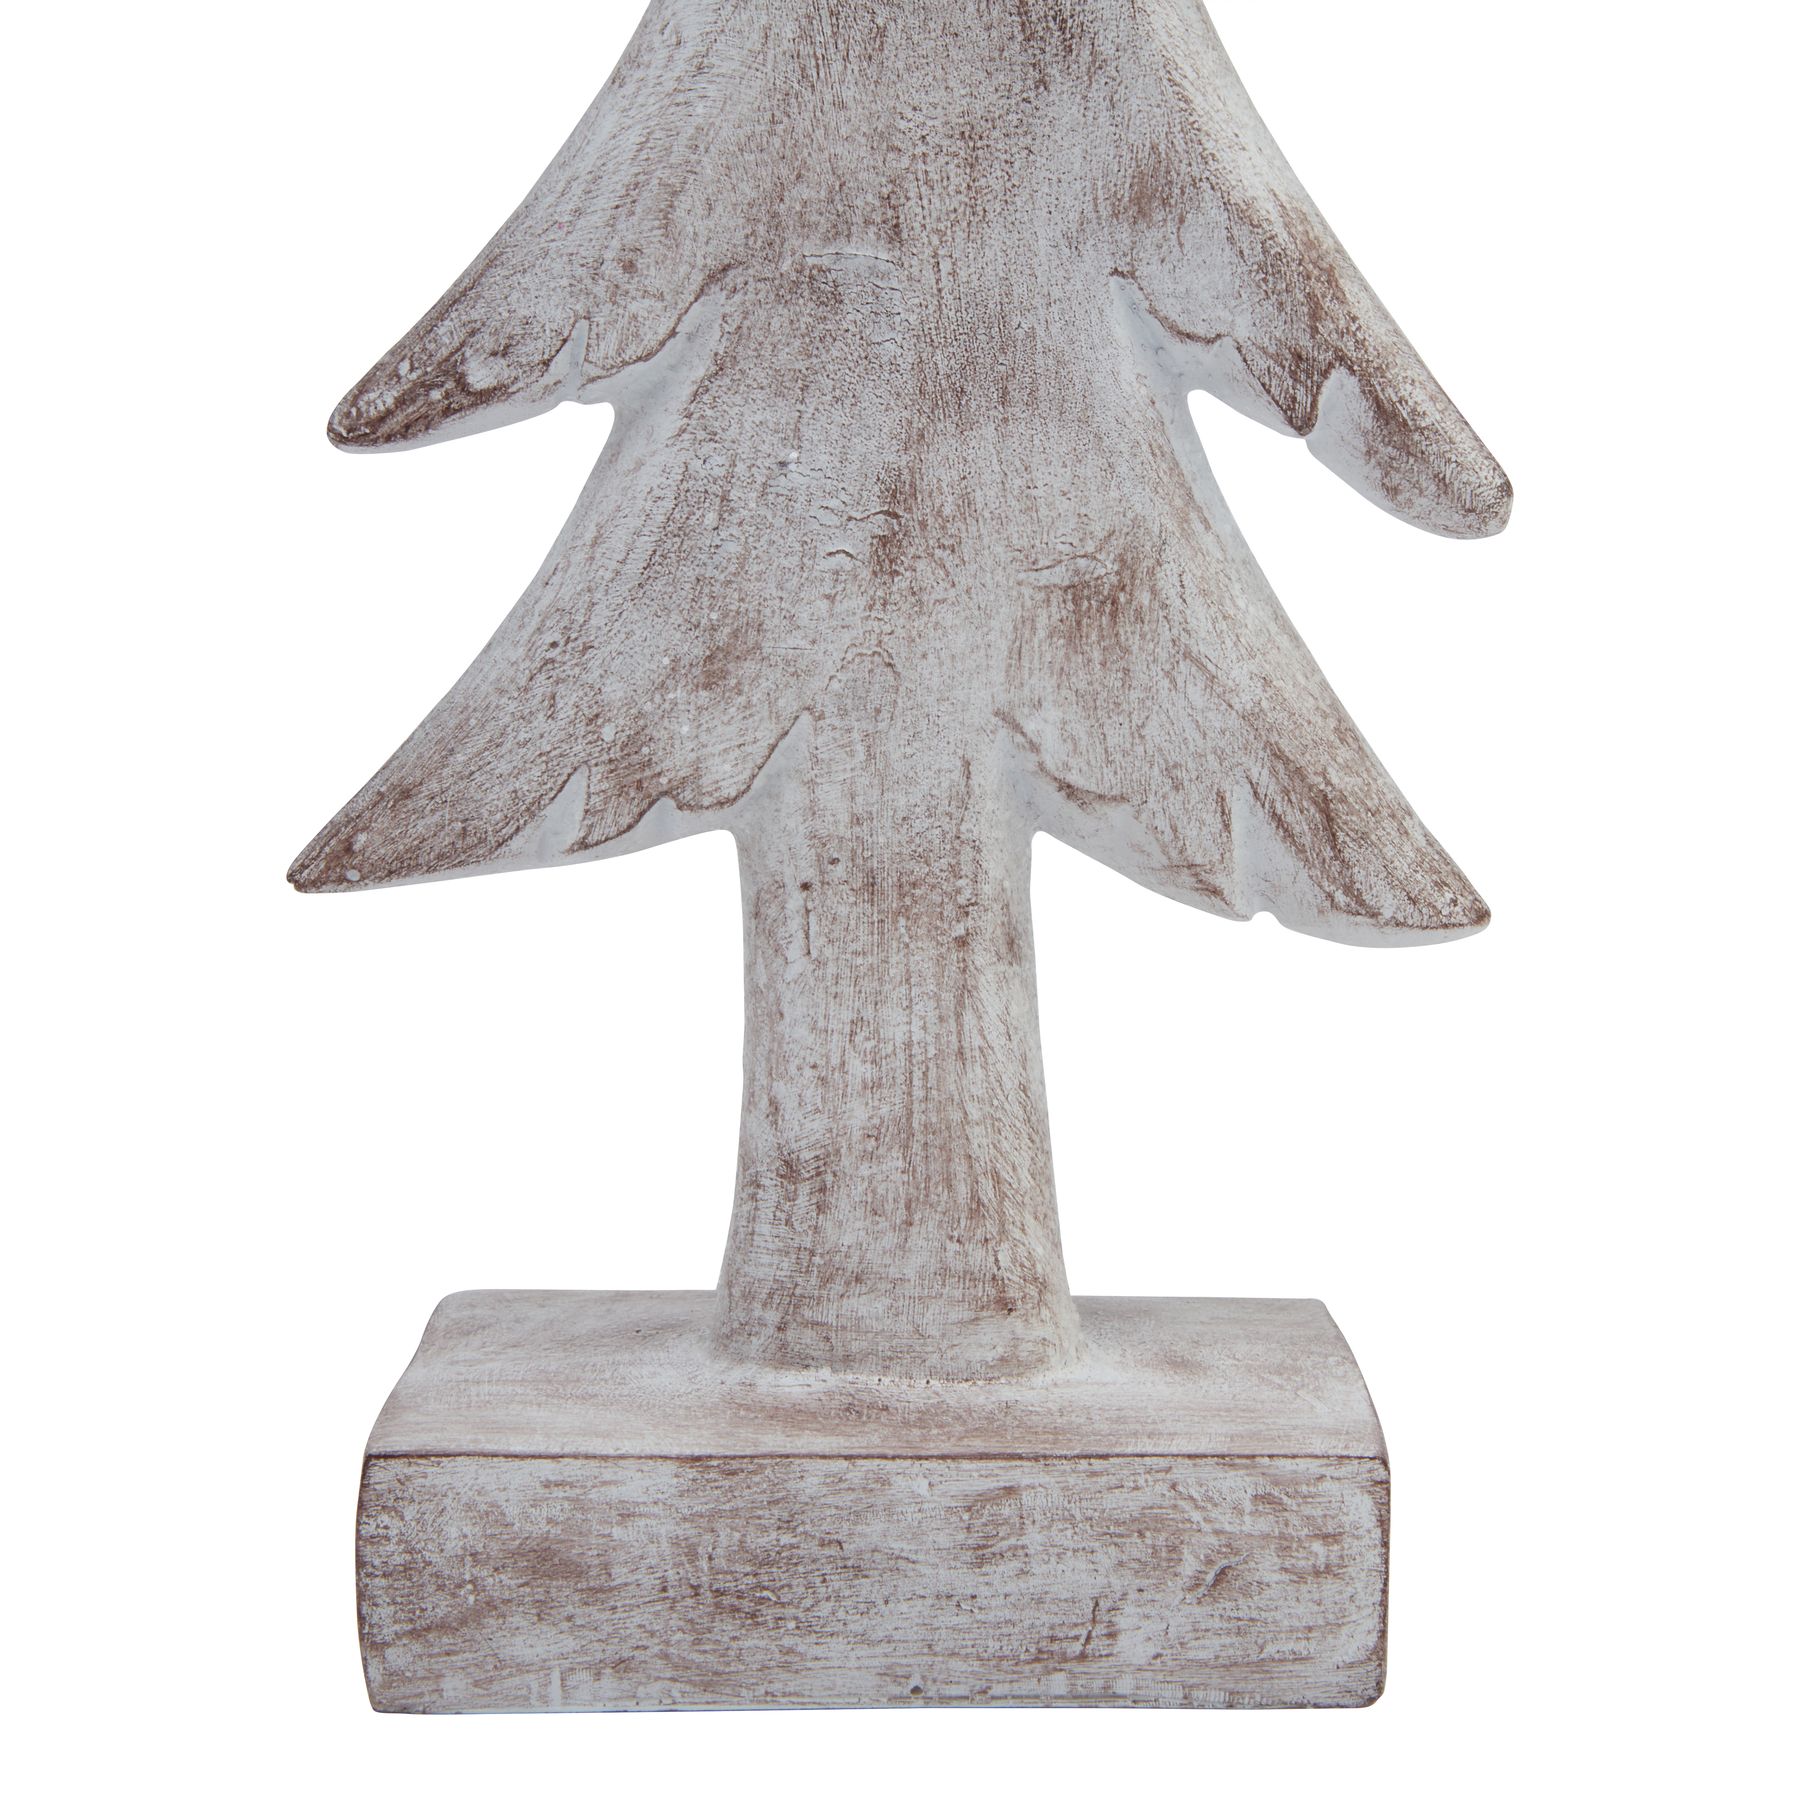 Large Snowy Forest Tree Sculpture - Image 3